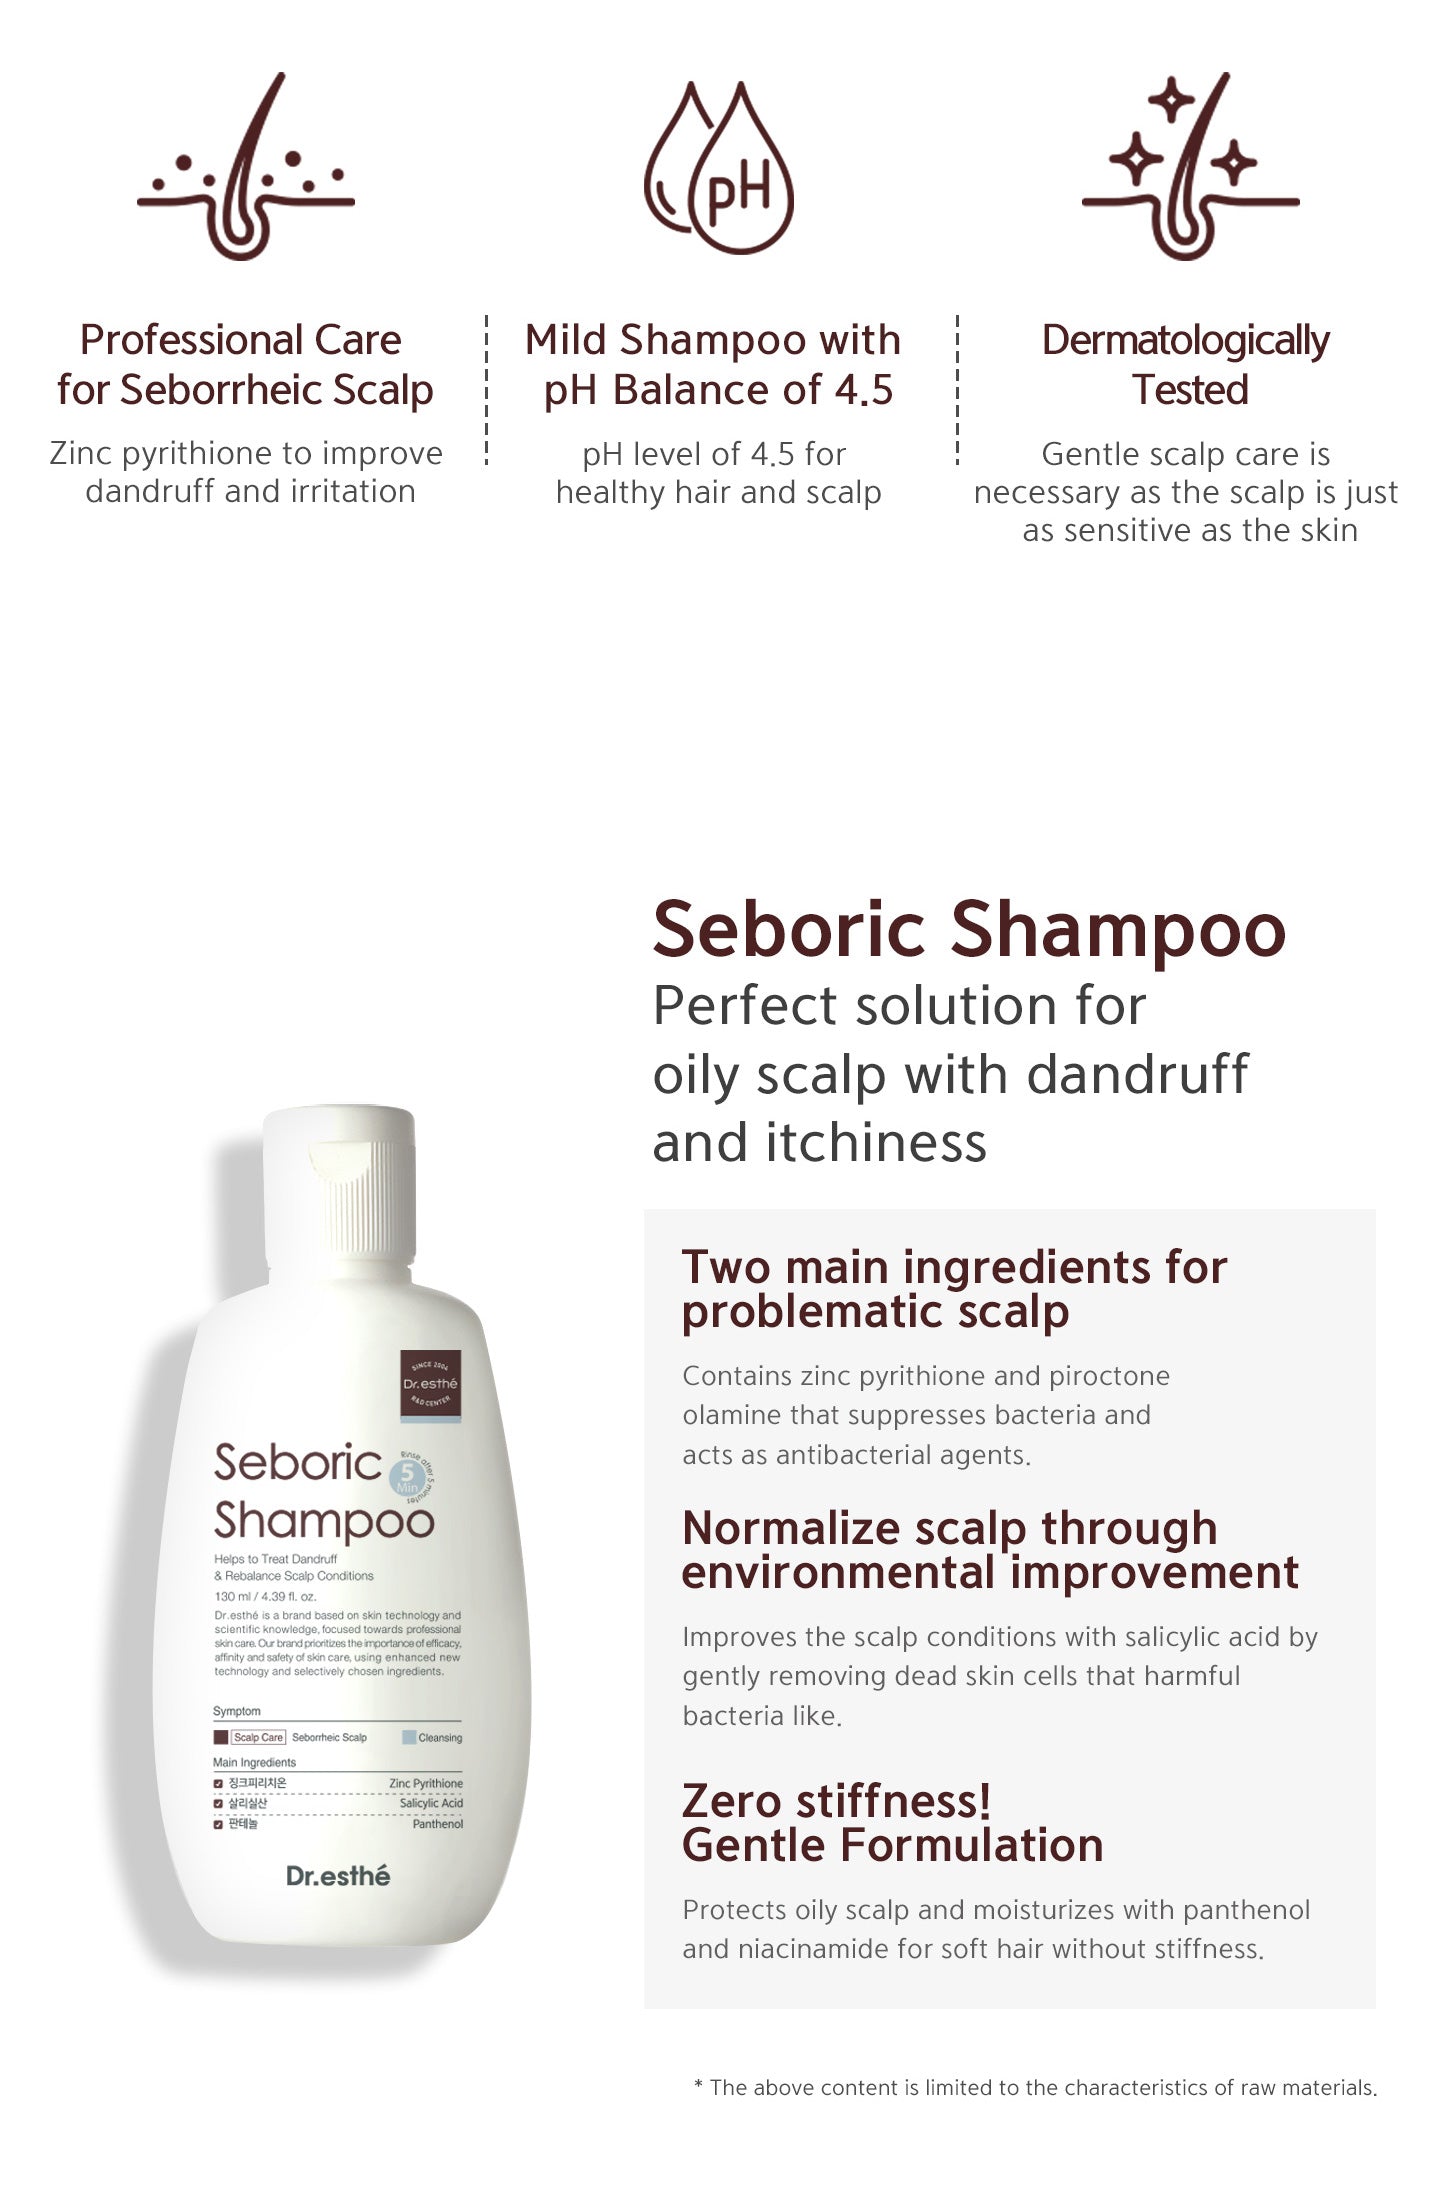 Perfect solution for oily scalp with dandruff and itchiness. Two main ingredients for problematic scalp, normalize scalp through environmental improvement, zero stiffness! gentle formulation. Mild shampoo with pH balance of 4.5. Dermatologically tested. 